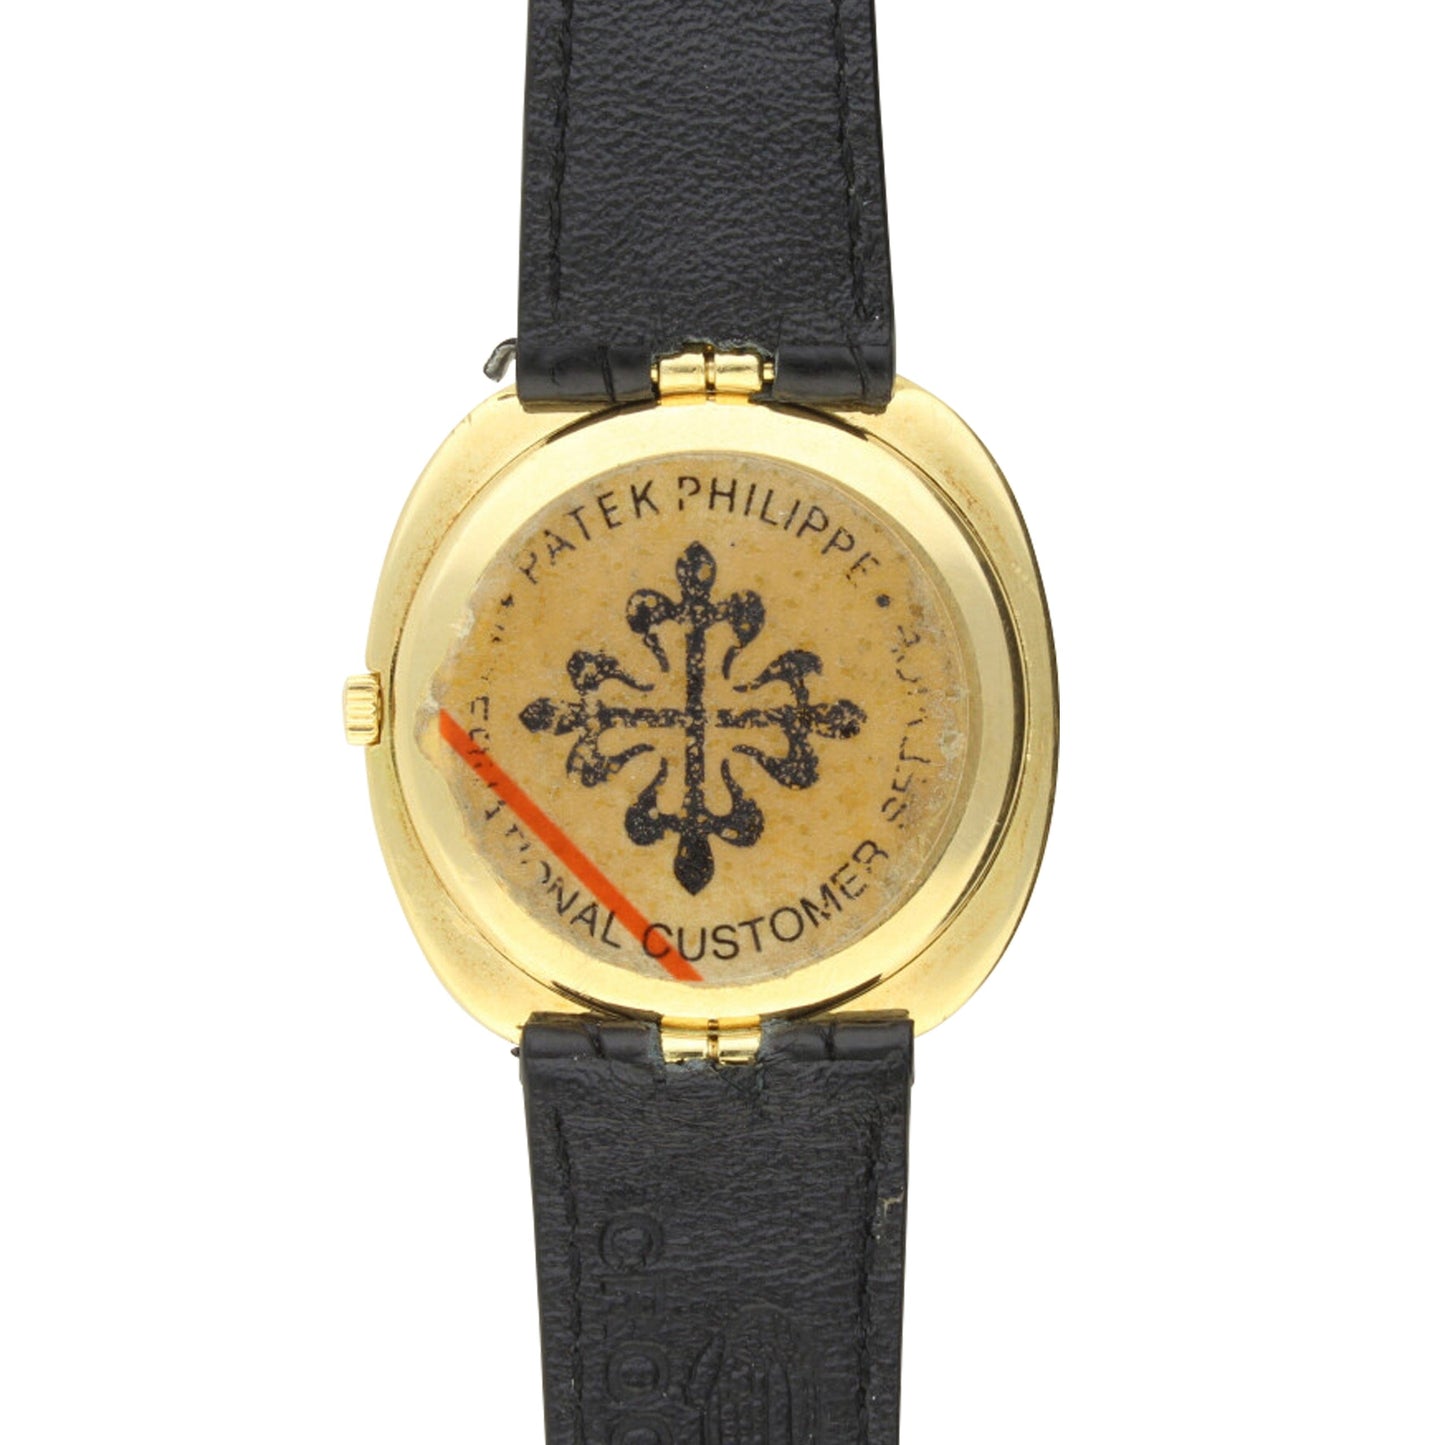 18ct yellow gold, reference 3589 "Golden Ellipse" automatic wristwatch, retailed by GÜBELIN. Made 1971